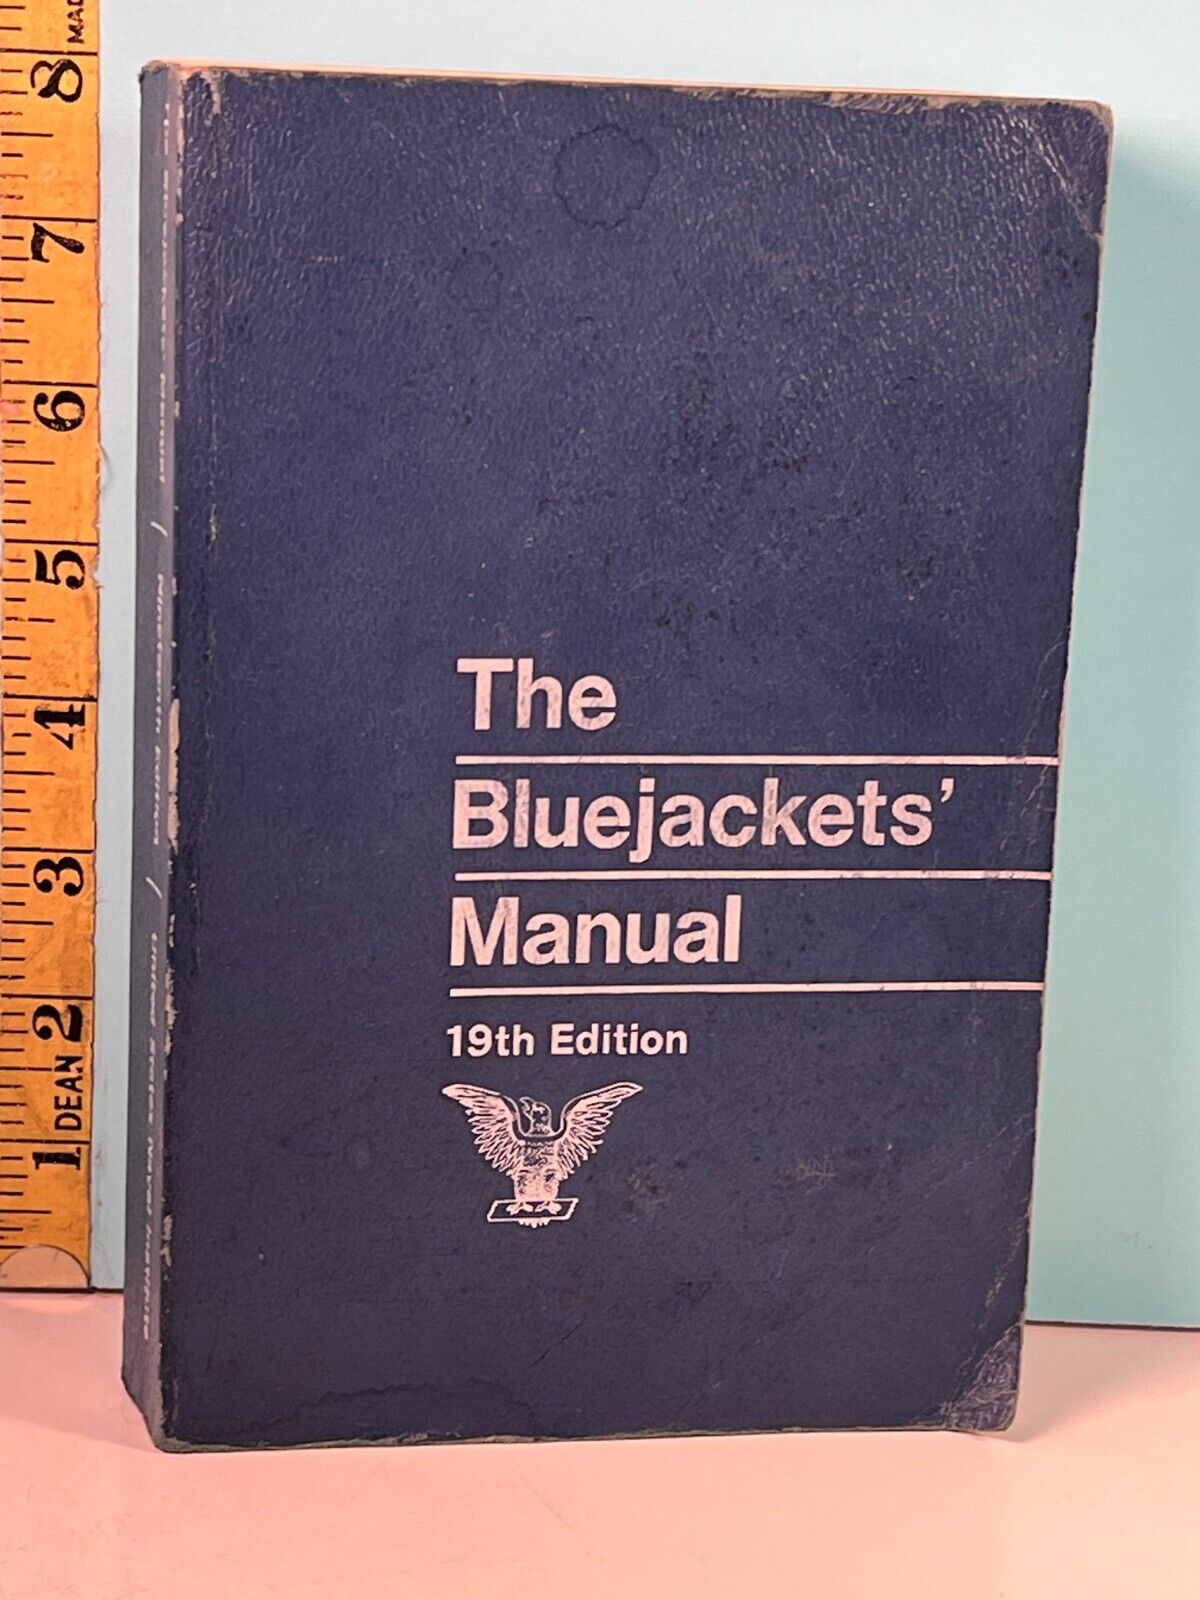 🔥1974 The Bluejackets Manual The United States Naval Institute 19th Ed.🔥